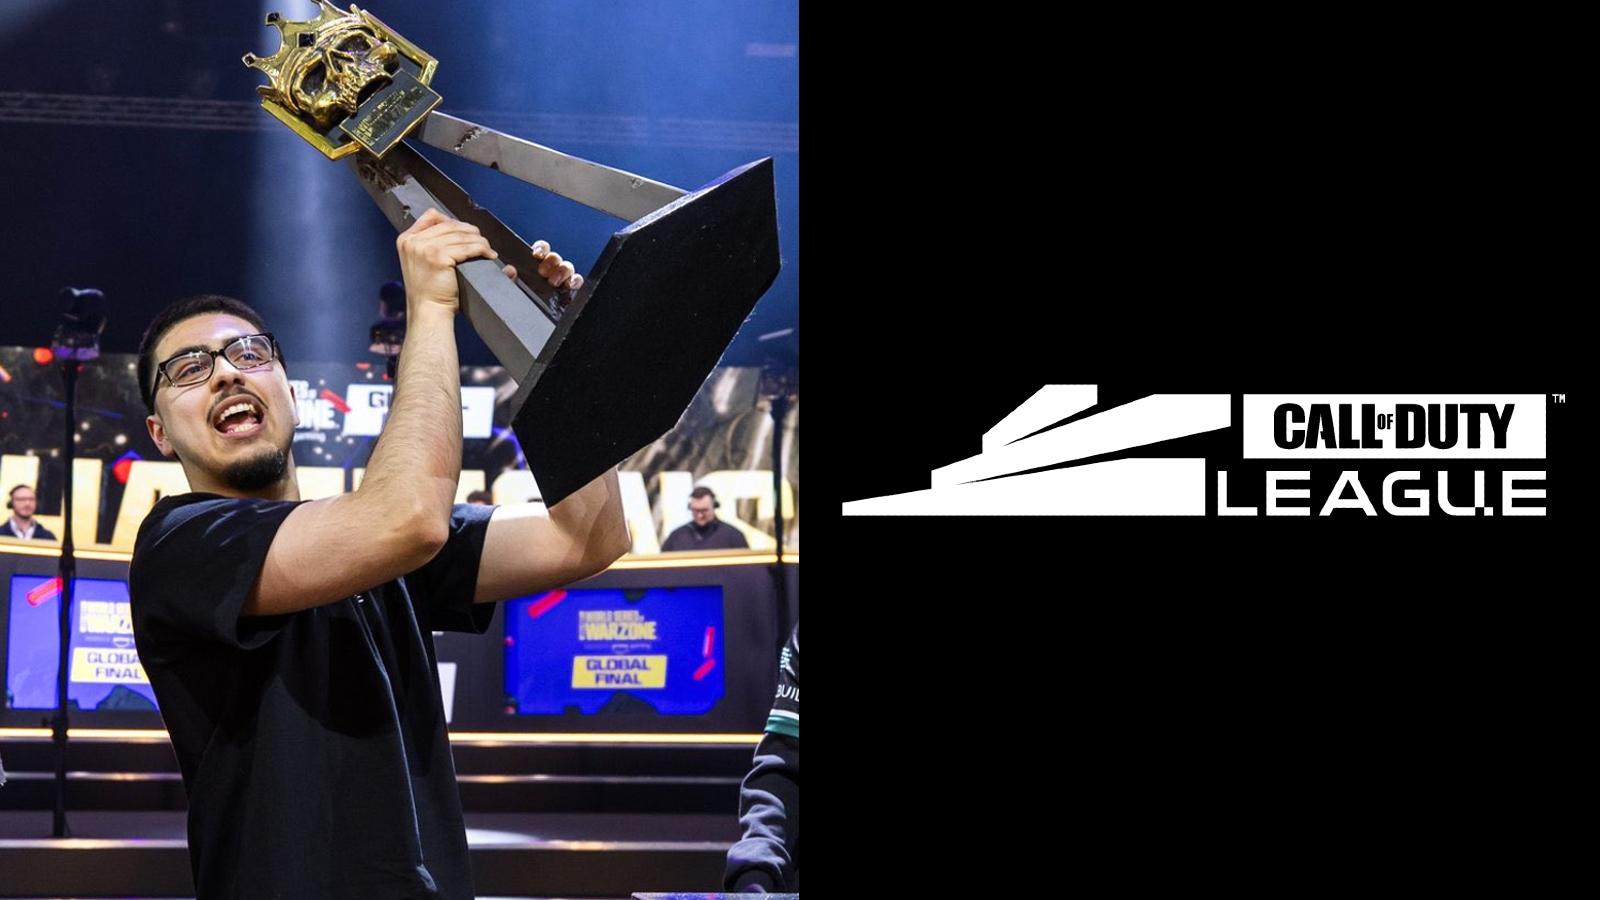 Shifty holding WSOW trophy next to Call of Duty league logo on black background